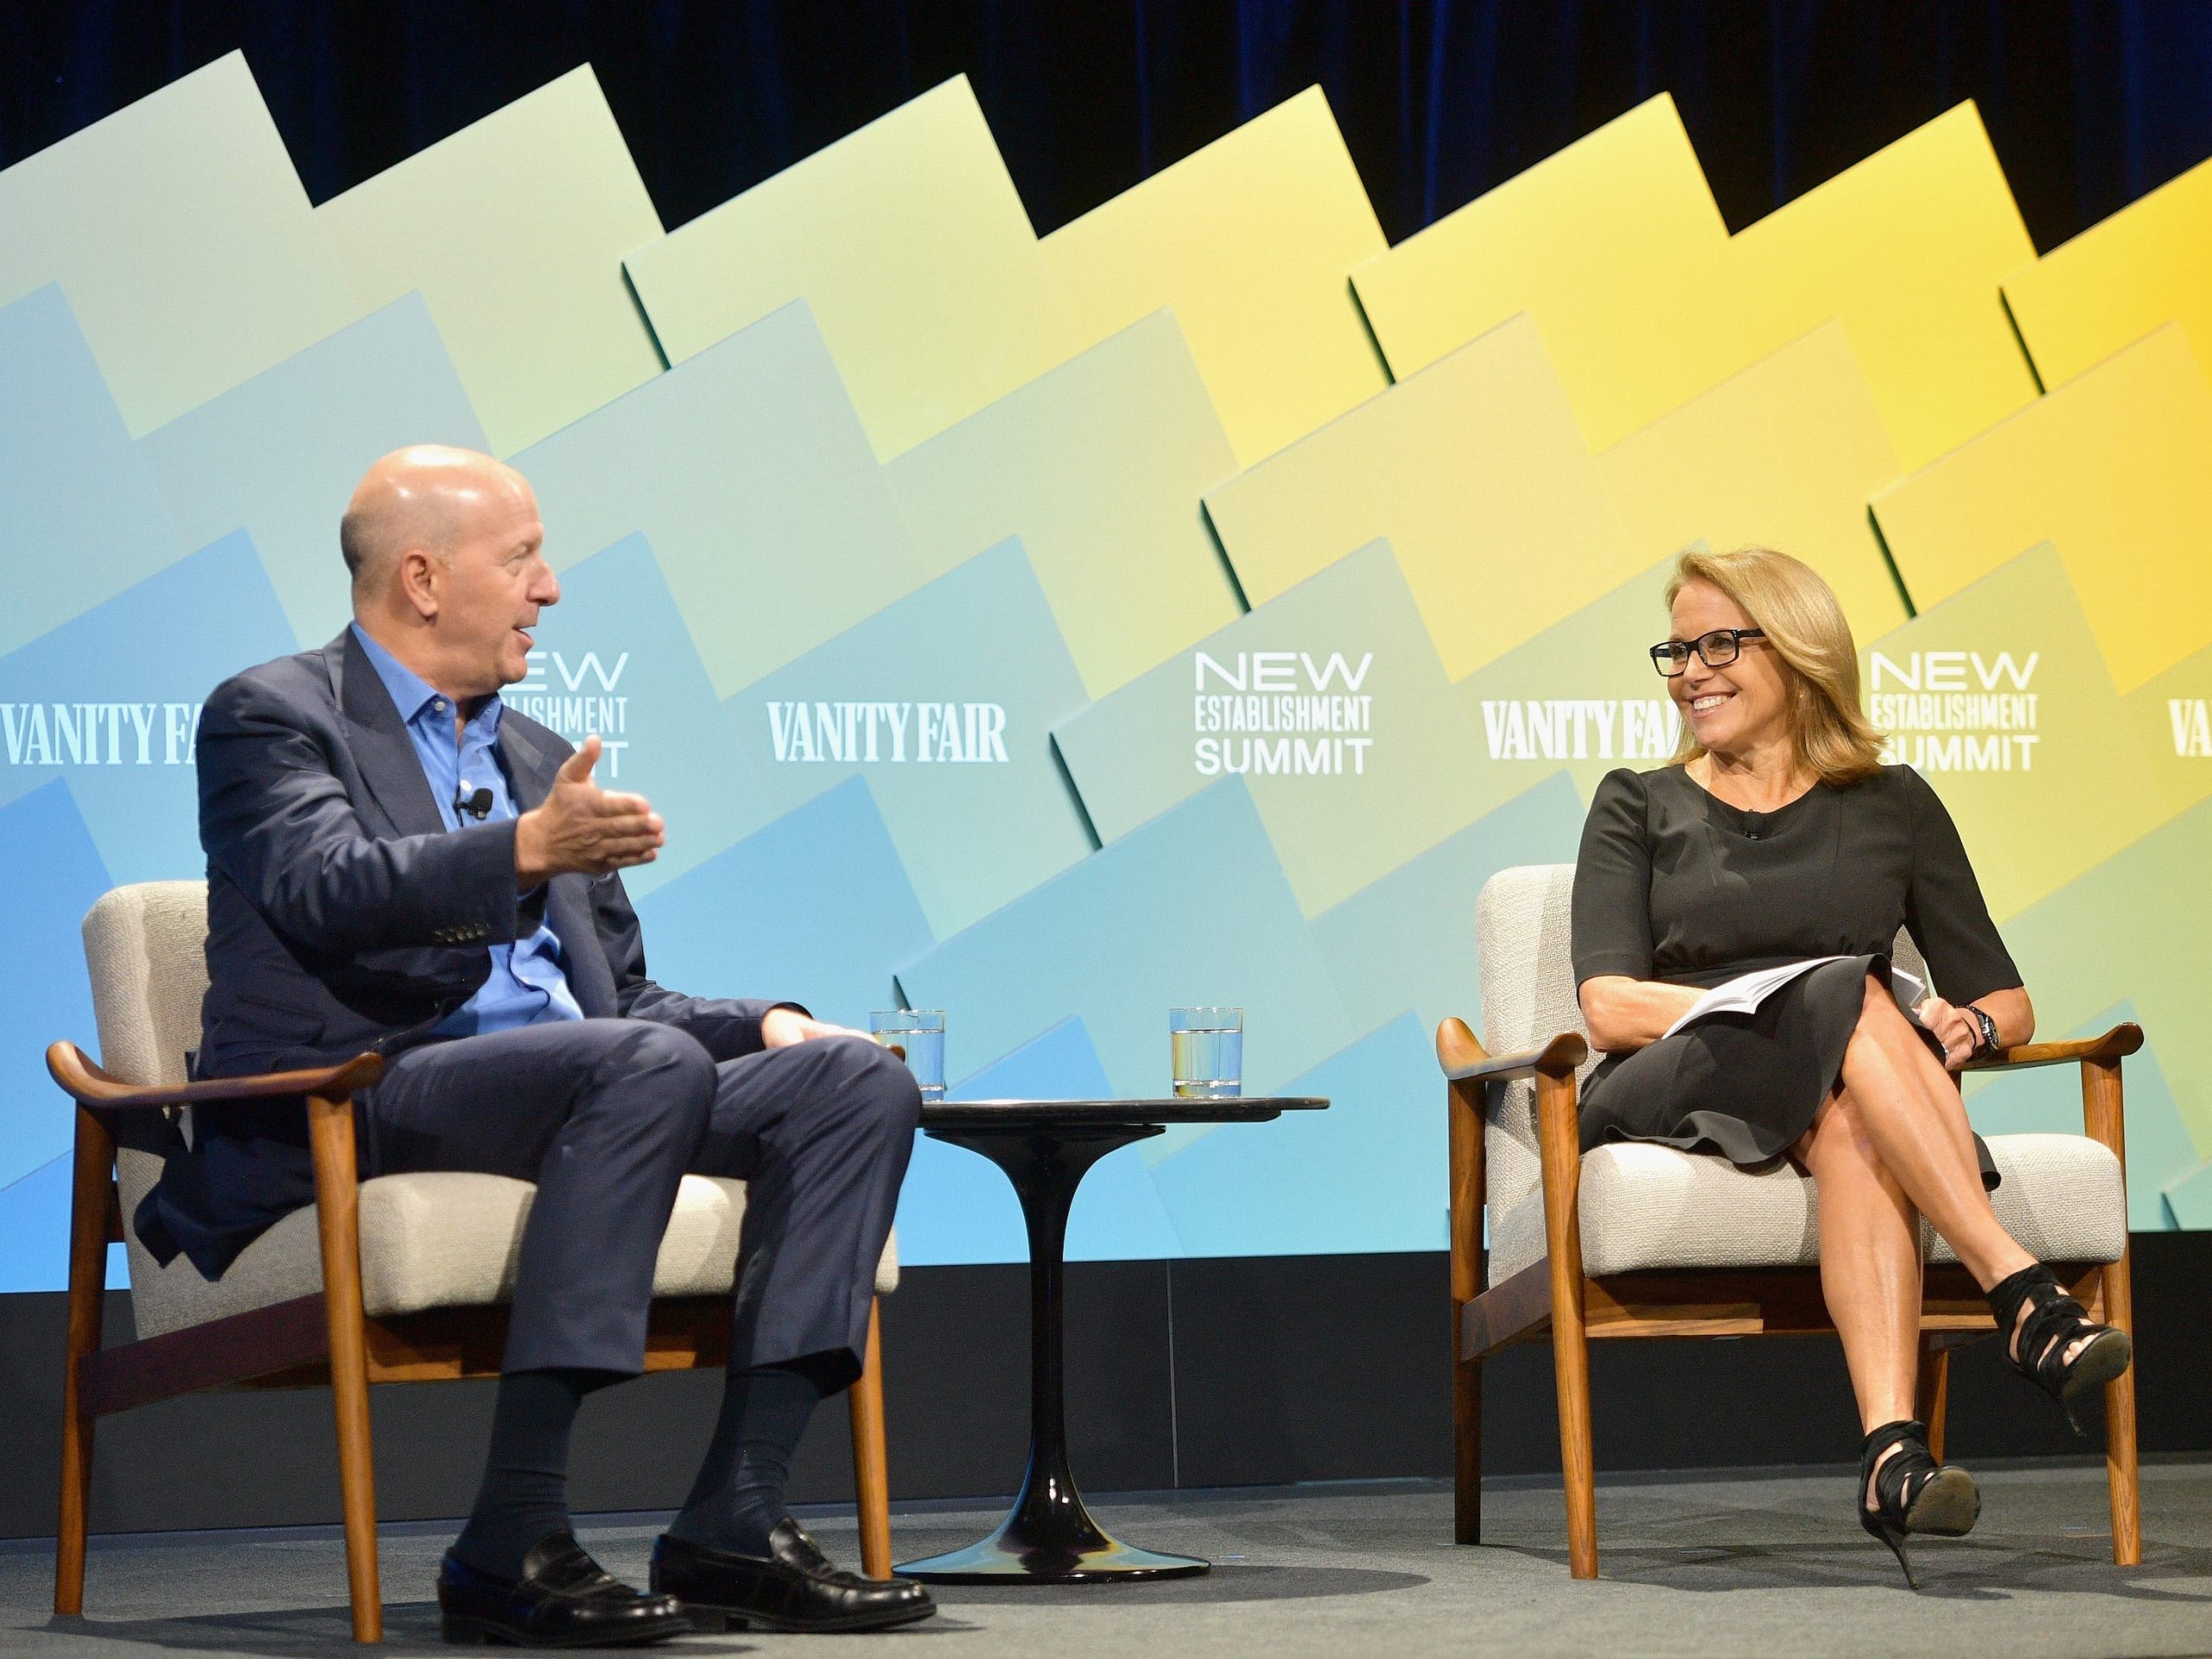 Goldman Sachs CEO David Solomon and journalist Katie Couric speak onstage at a Vanity Fair event in 2018.